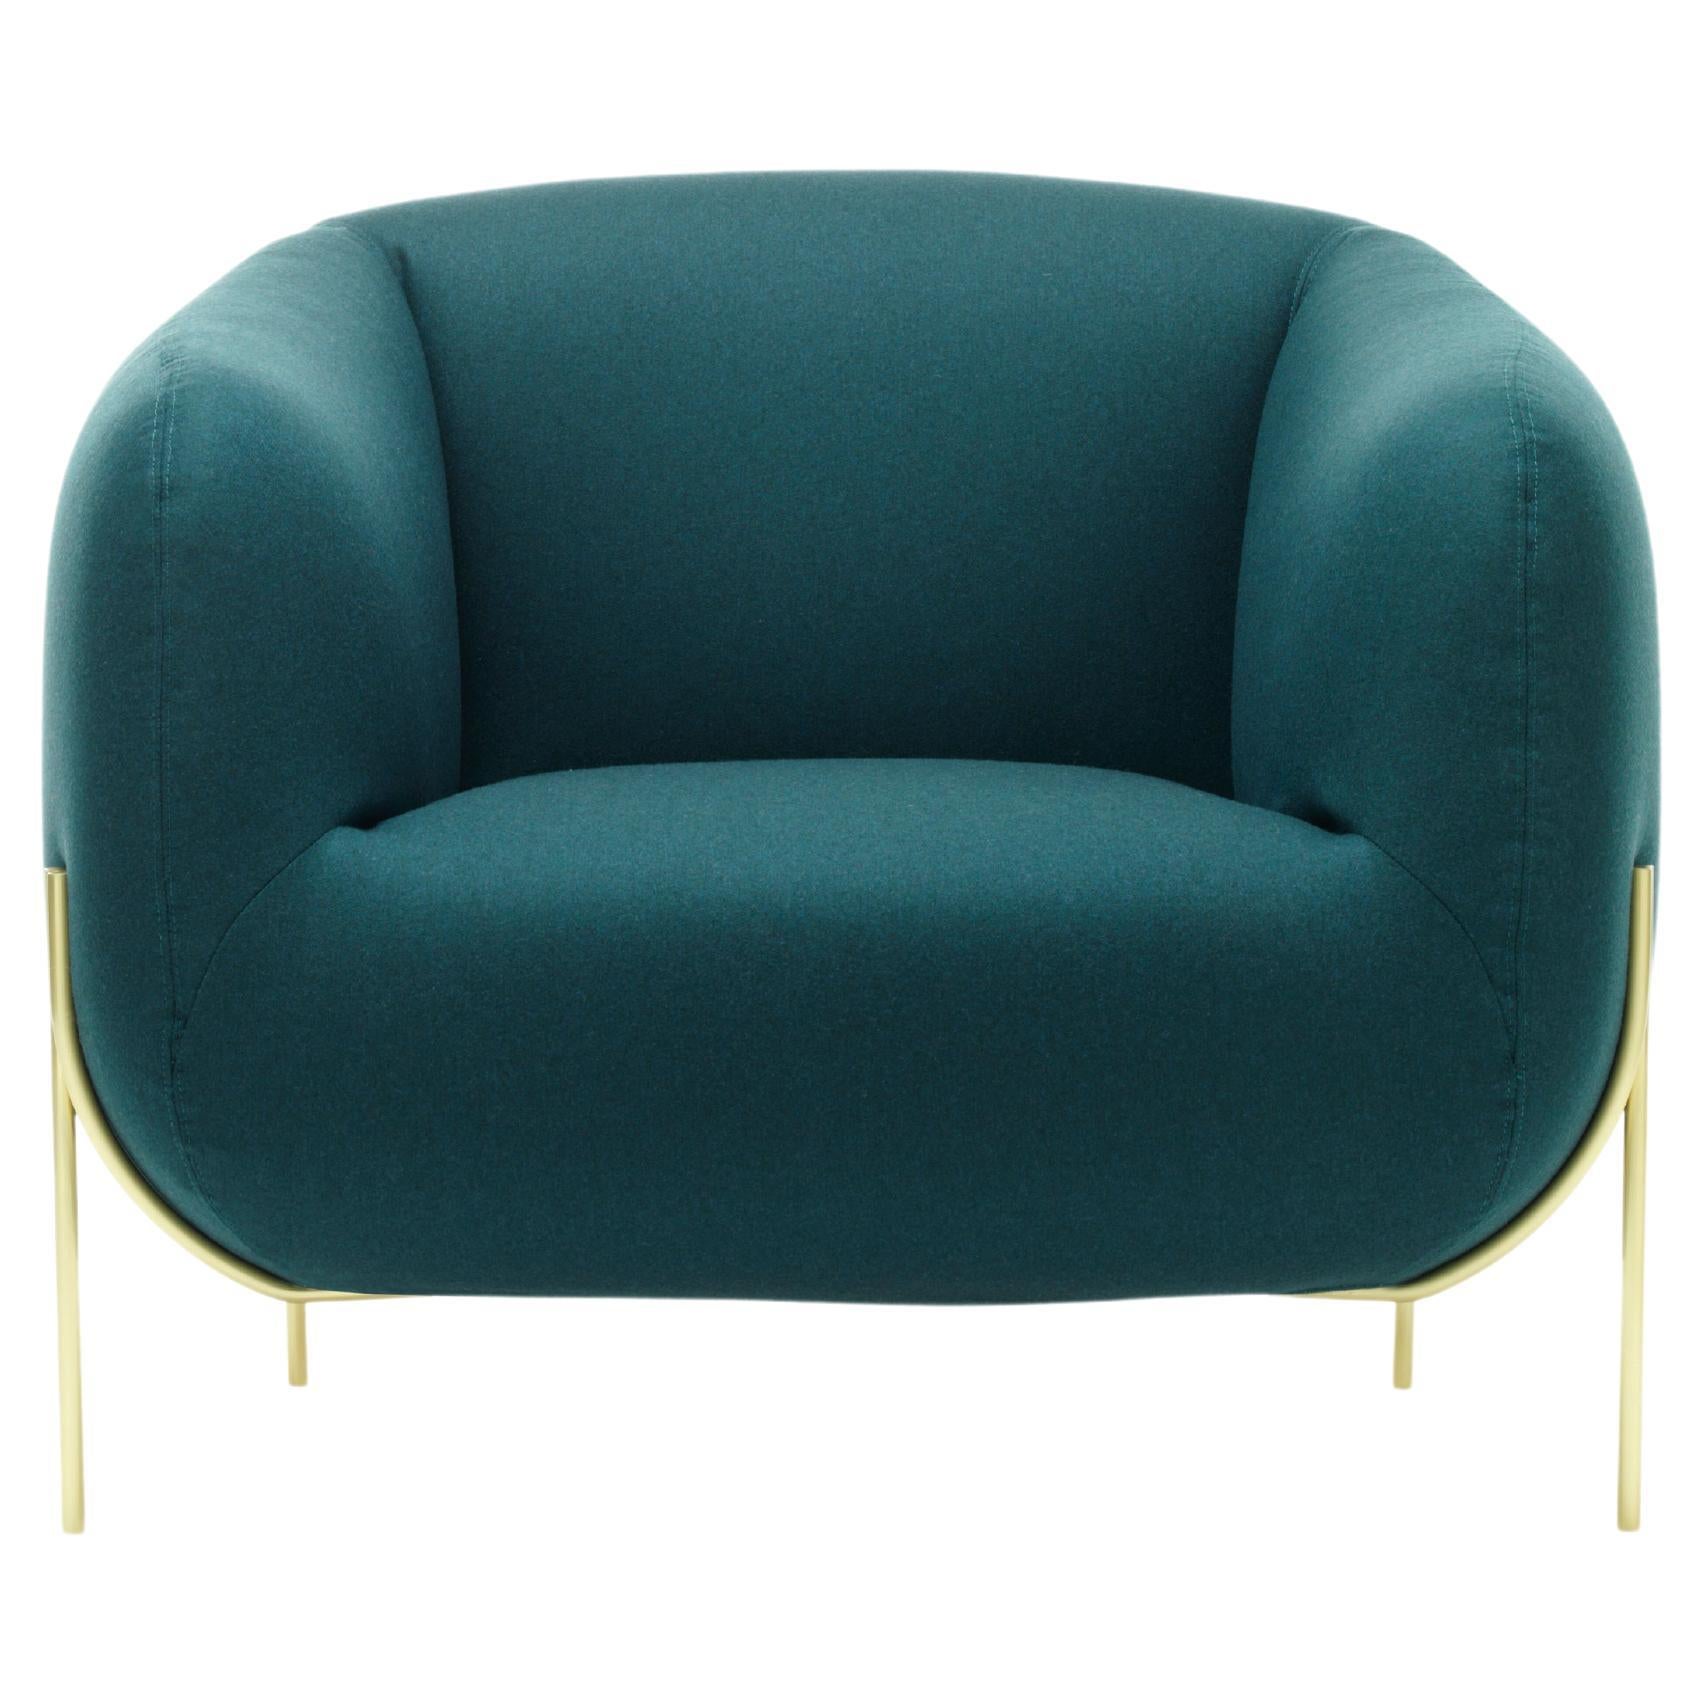 Geo Armchair Braided Blue Upholstery & Satin Brass by Paolo Grasselli